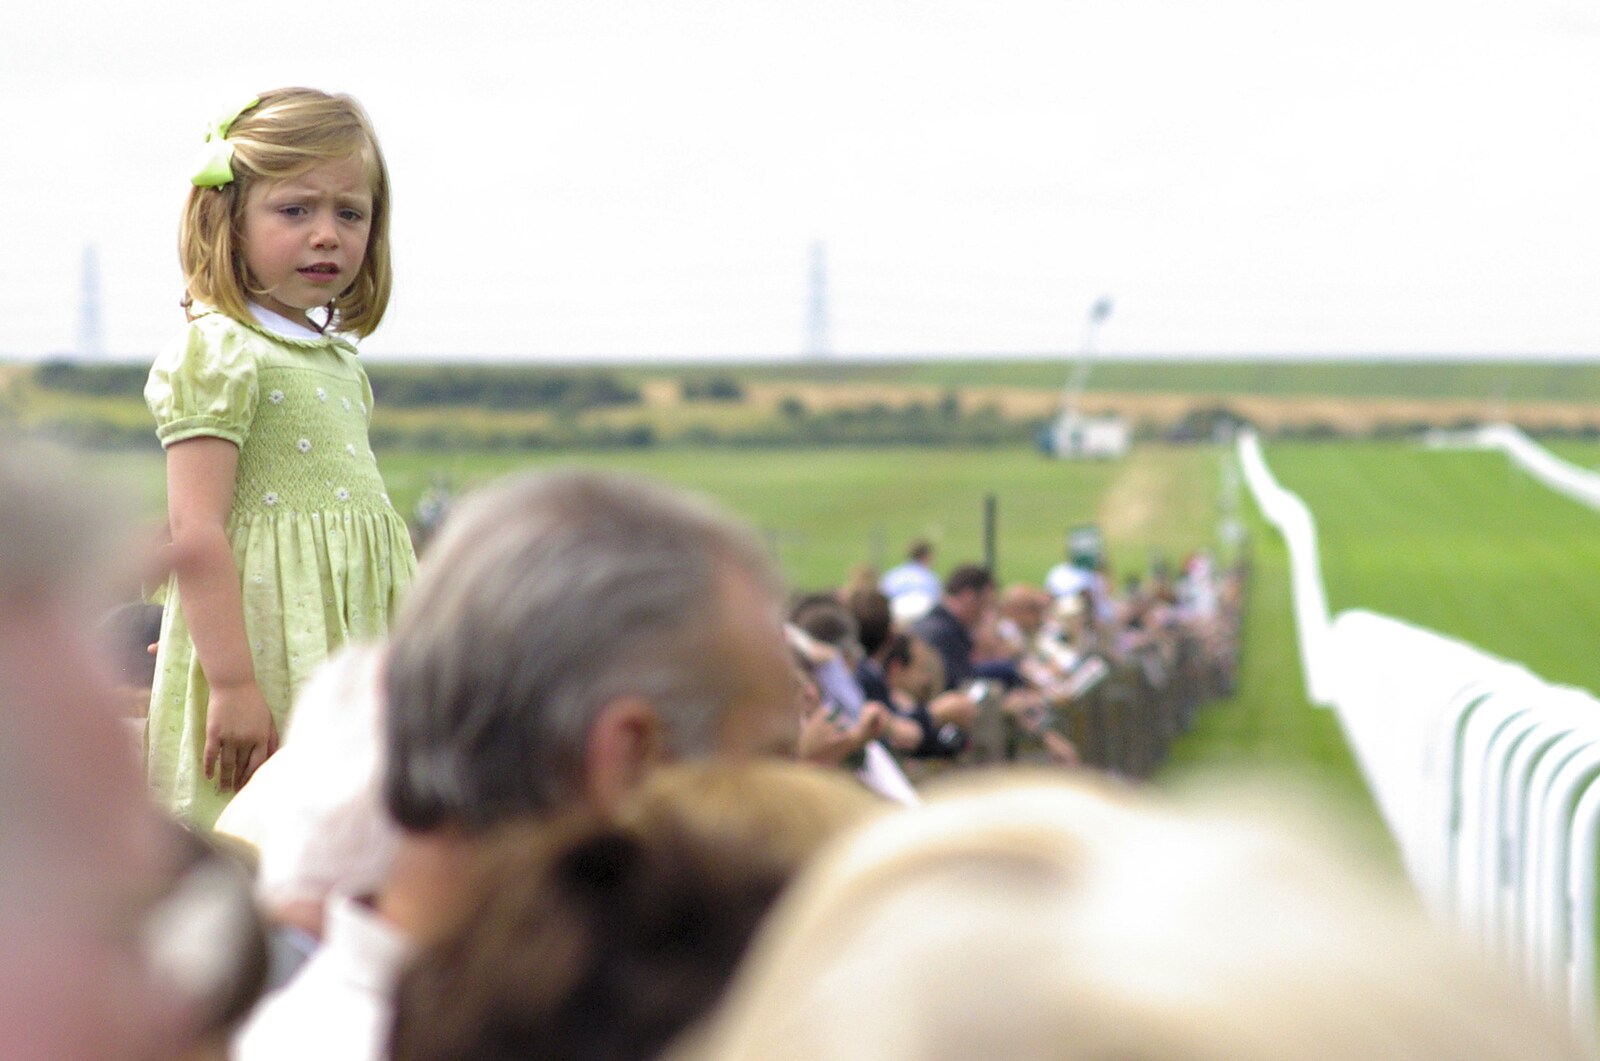 A Day At The Races, Newmarket, Suffolk - 23rd August 2008: A small girl looks out over the July course